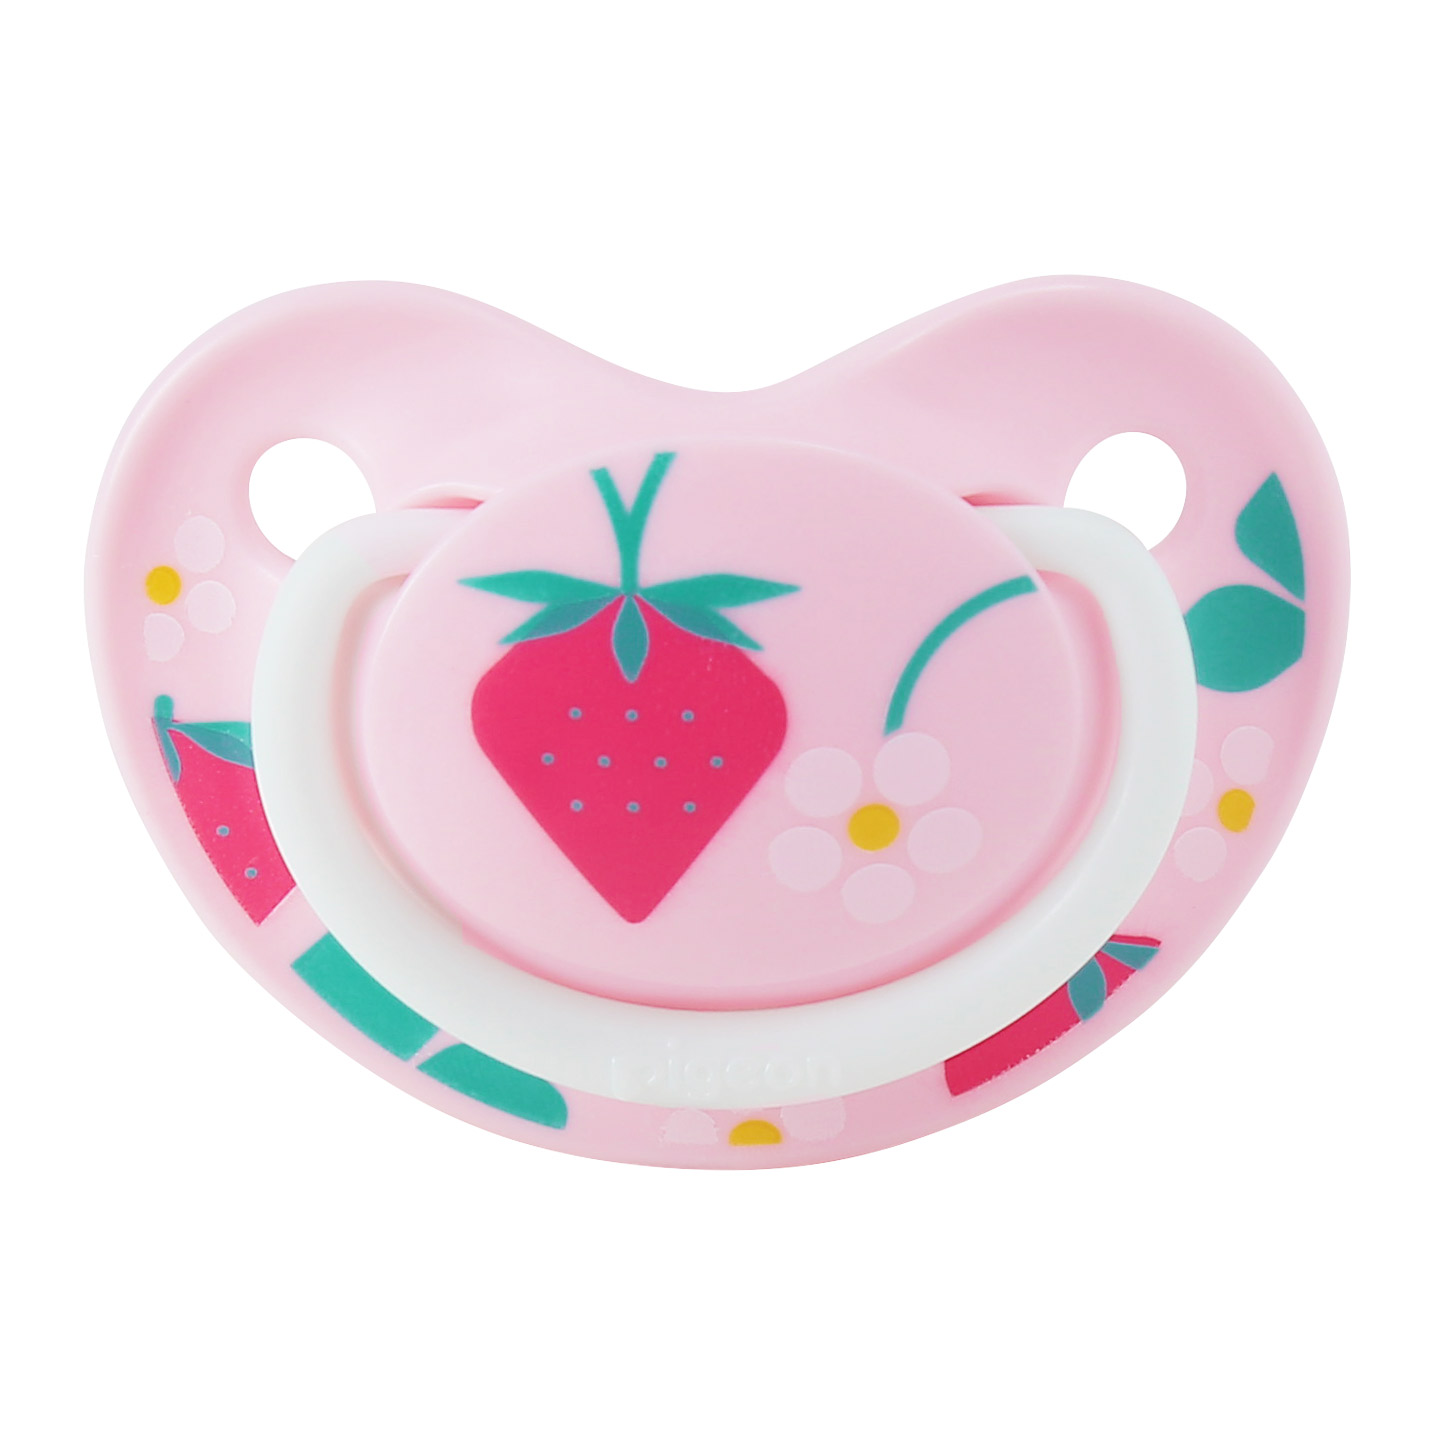 Pigeon Soother Funfriends S Size - Strawberry (JP) (PG-1018863)